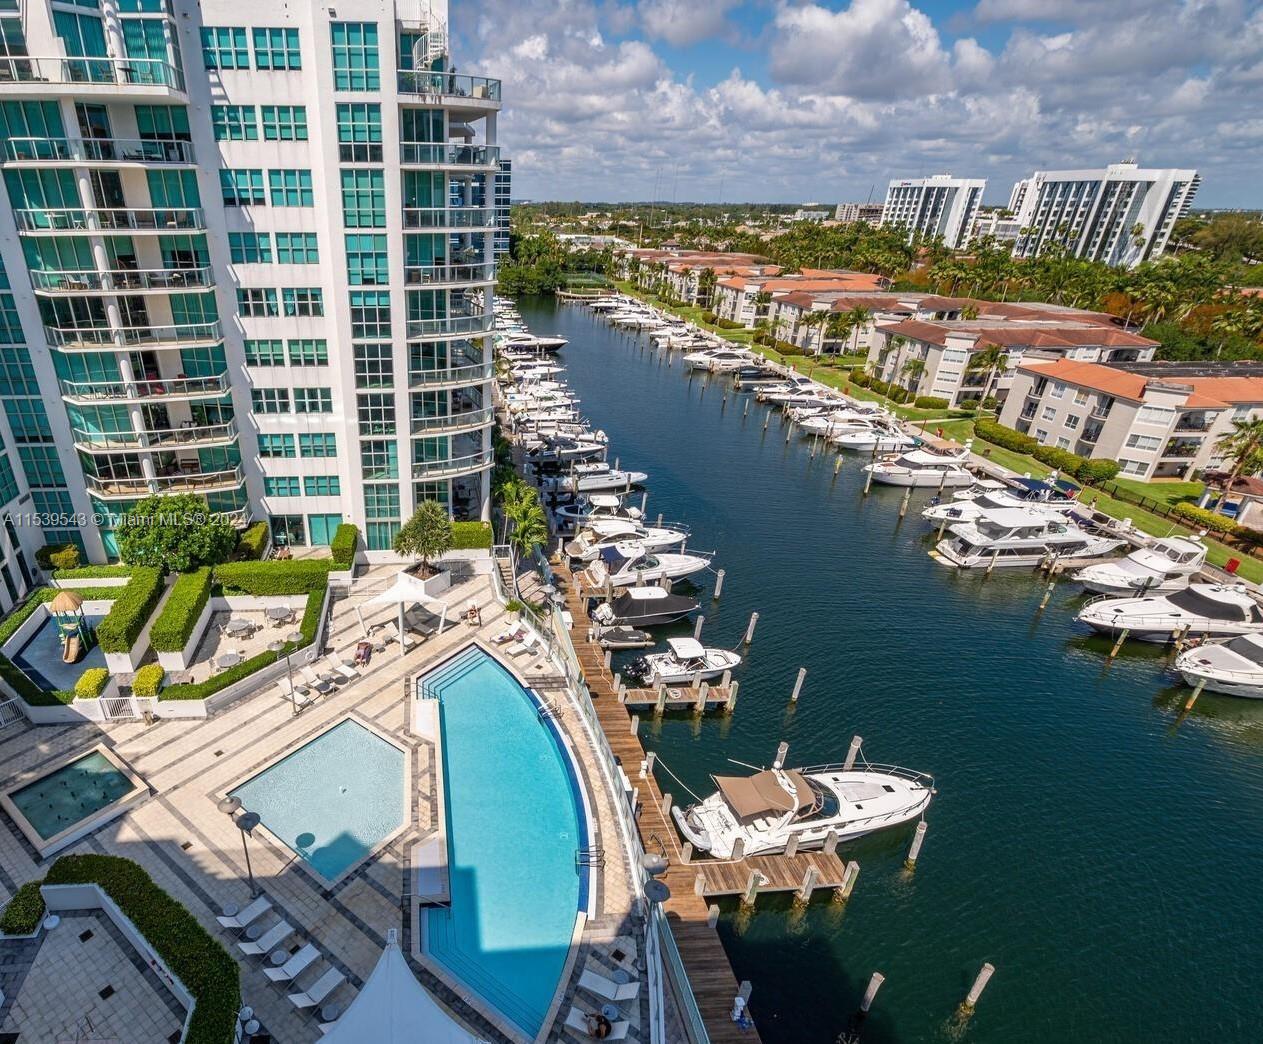 Beautiful waterfront condo in prestigious Atrium at Aventura. Furnished, split floor plan, marble floors throughout living area. Beautiful kitchen with granite countertops, stainless steel appliances, marble baths, custom closets and 2 assigned parking spaces. The Atrium at Aventura is a boutique building in the heart of Aventura, close to Aventura Art Center, Aventura Mall, Publix, Walgreens, restaurants, and steps away from Aventura Charter School. The condominium offers a waterfront boardwalk, pool, jacuzzi, gym, spa, marina, great room, valet parking and 24-hour security. Please note, tenant must pay the security deposit required by the Association equal to 1 months’ rent.